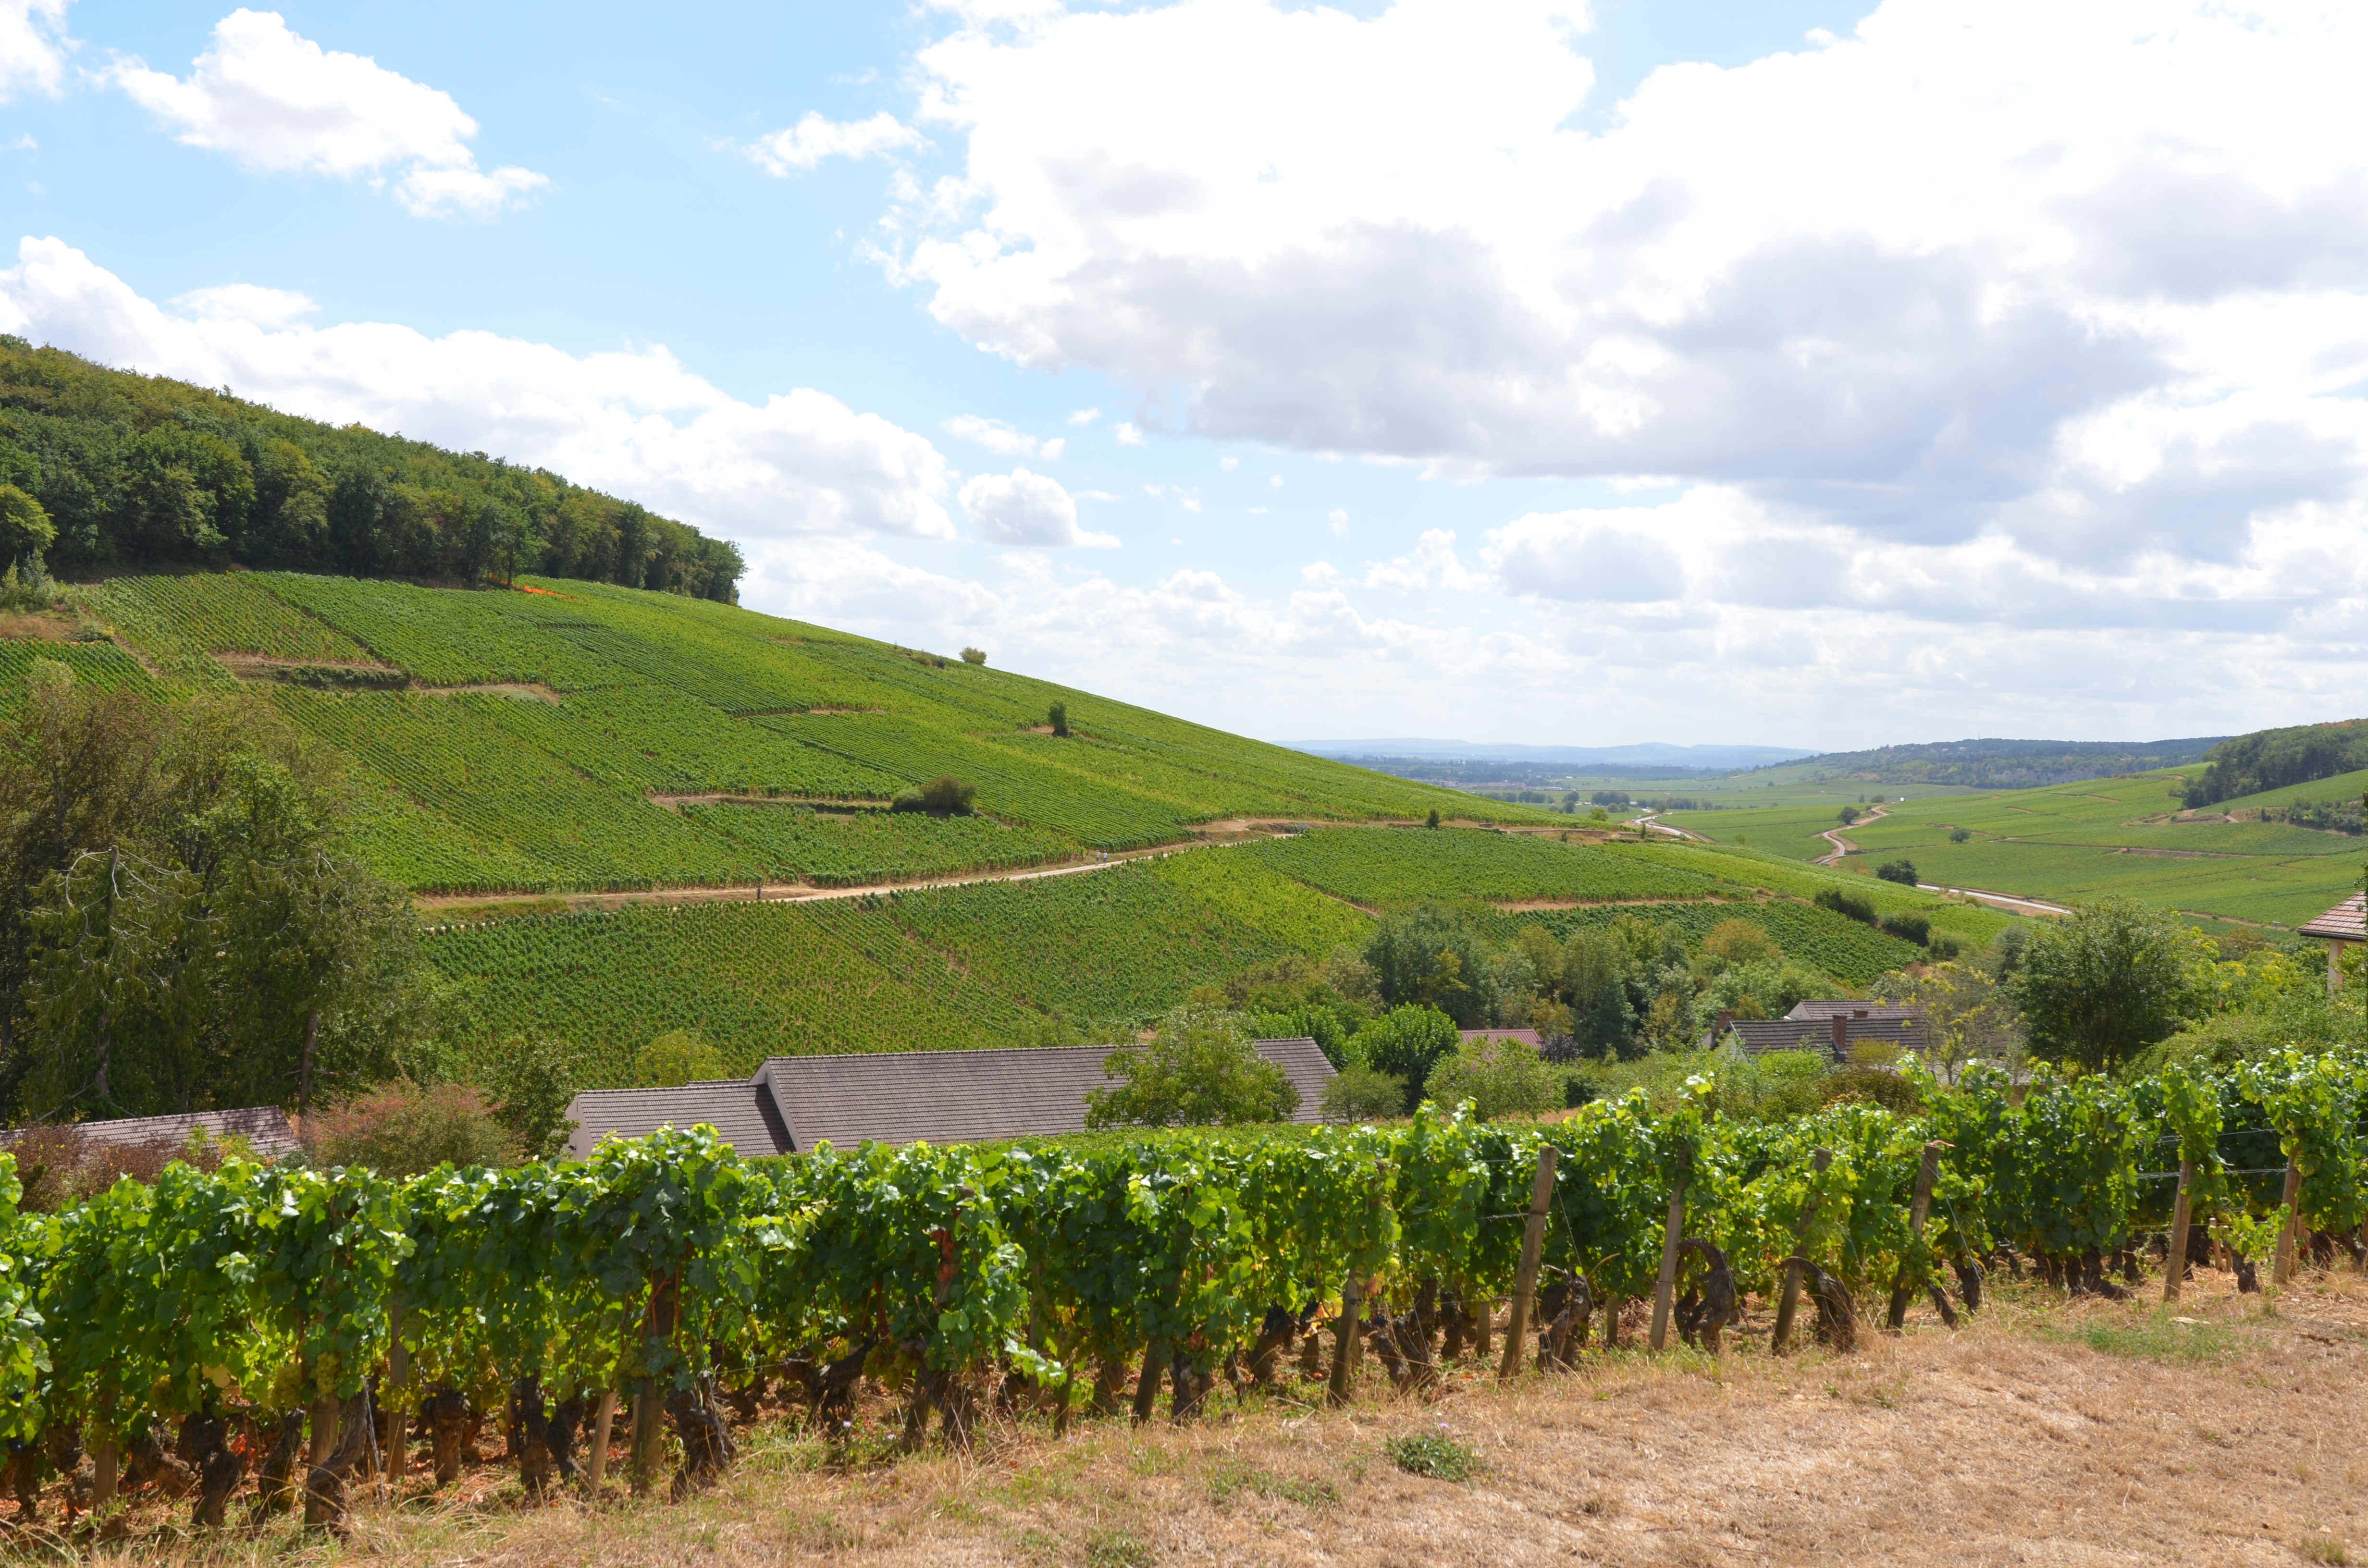 Sun shining upon the hill of Corton, in the heart of the <em>Route des Grands Crus</em> of Burgundy